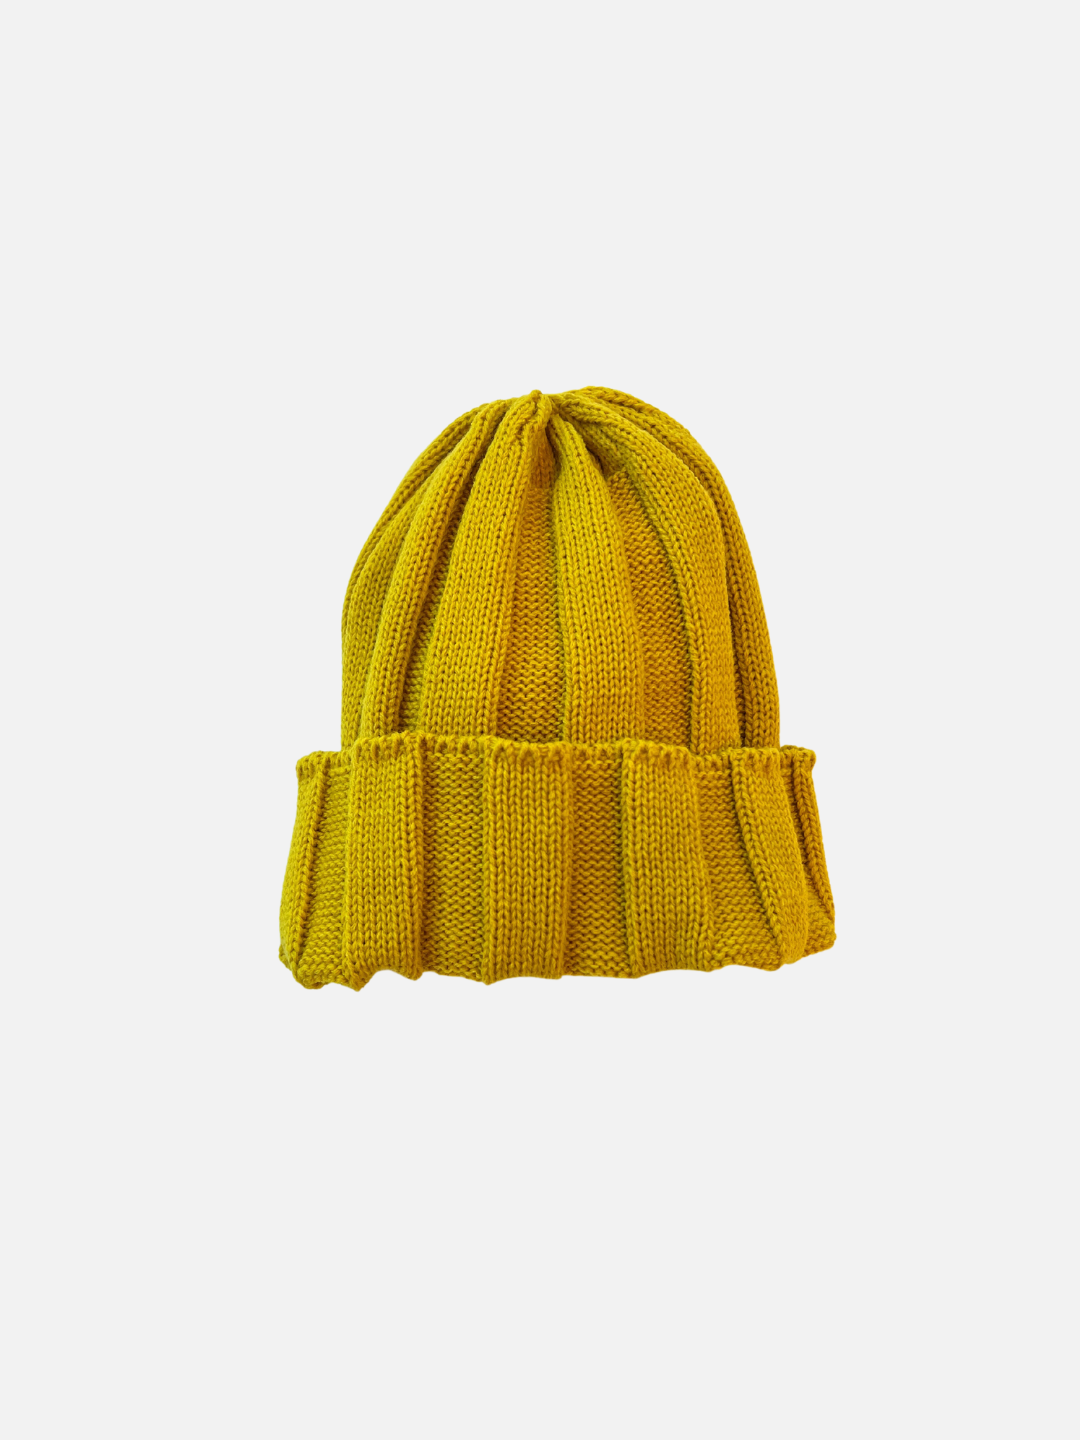 A kids' knitted beanie in mustard yellow